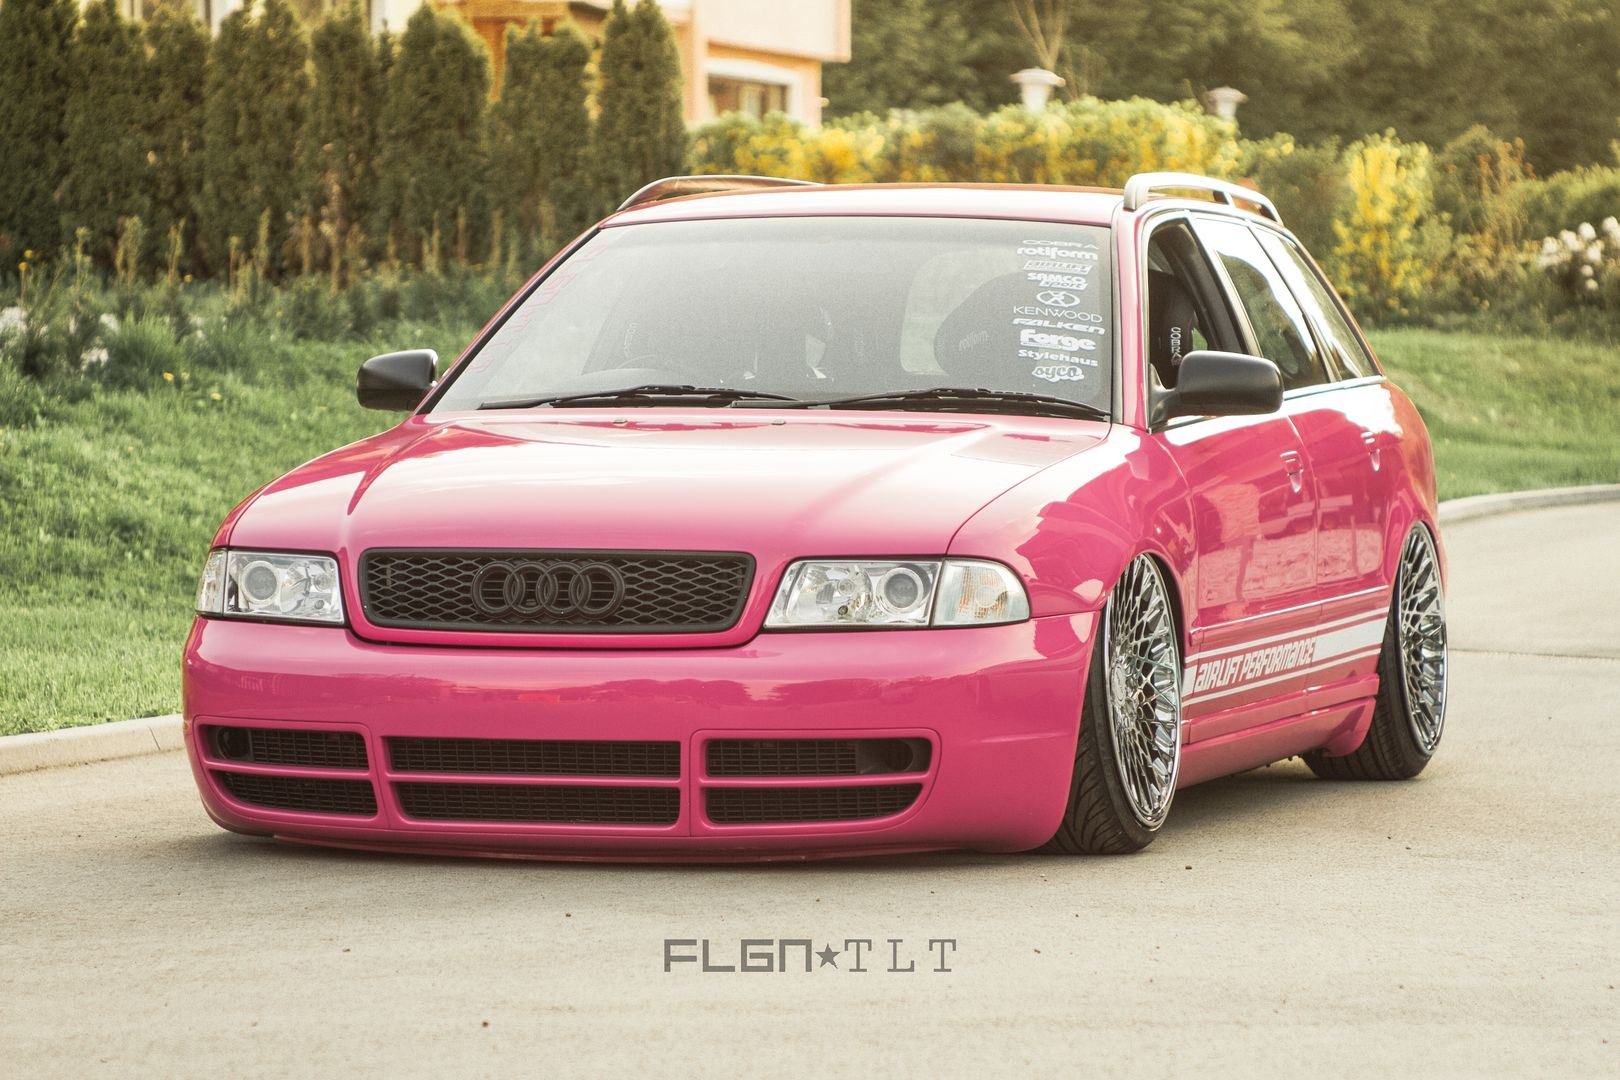 Aftermarket Halo Headlights on Pink Audi S4 - Photo by Rotiform